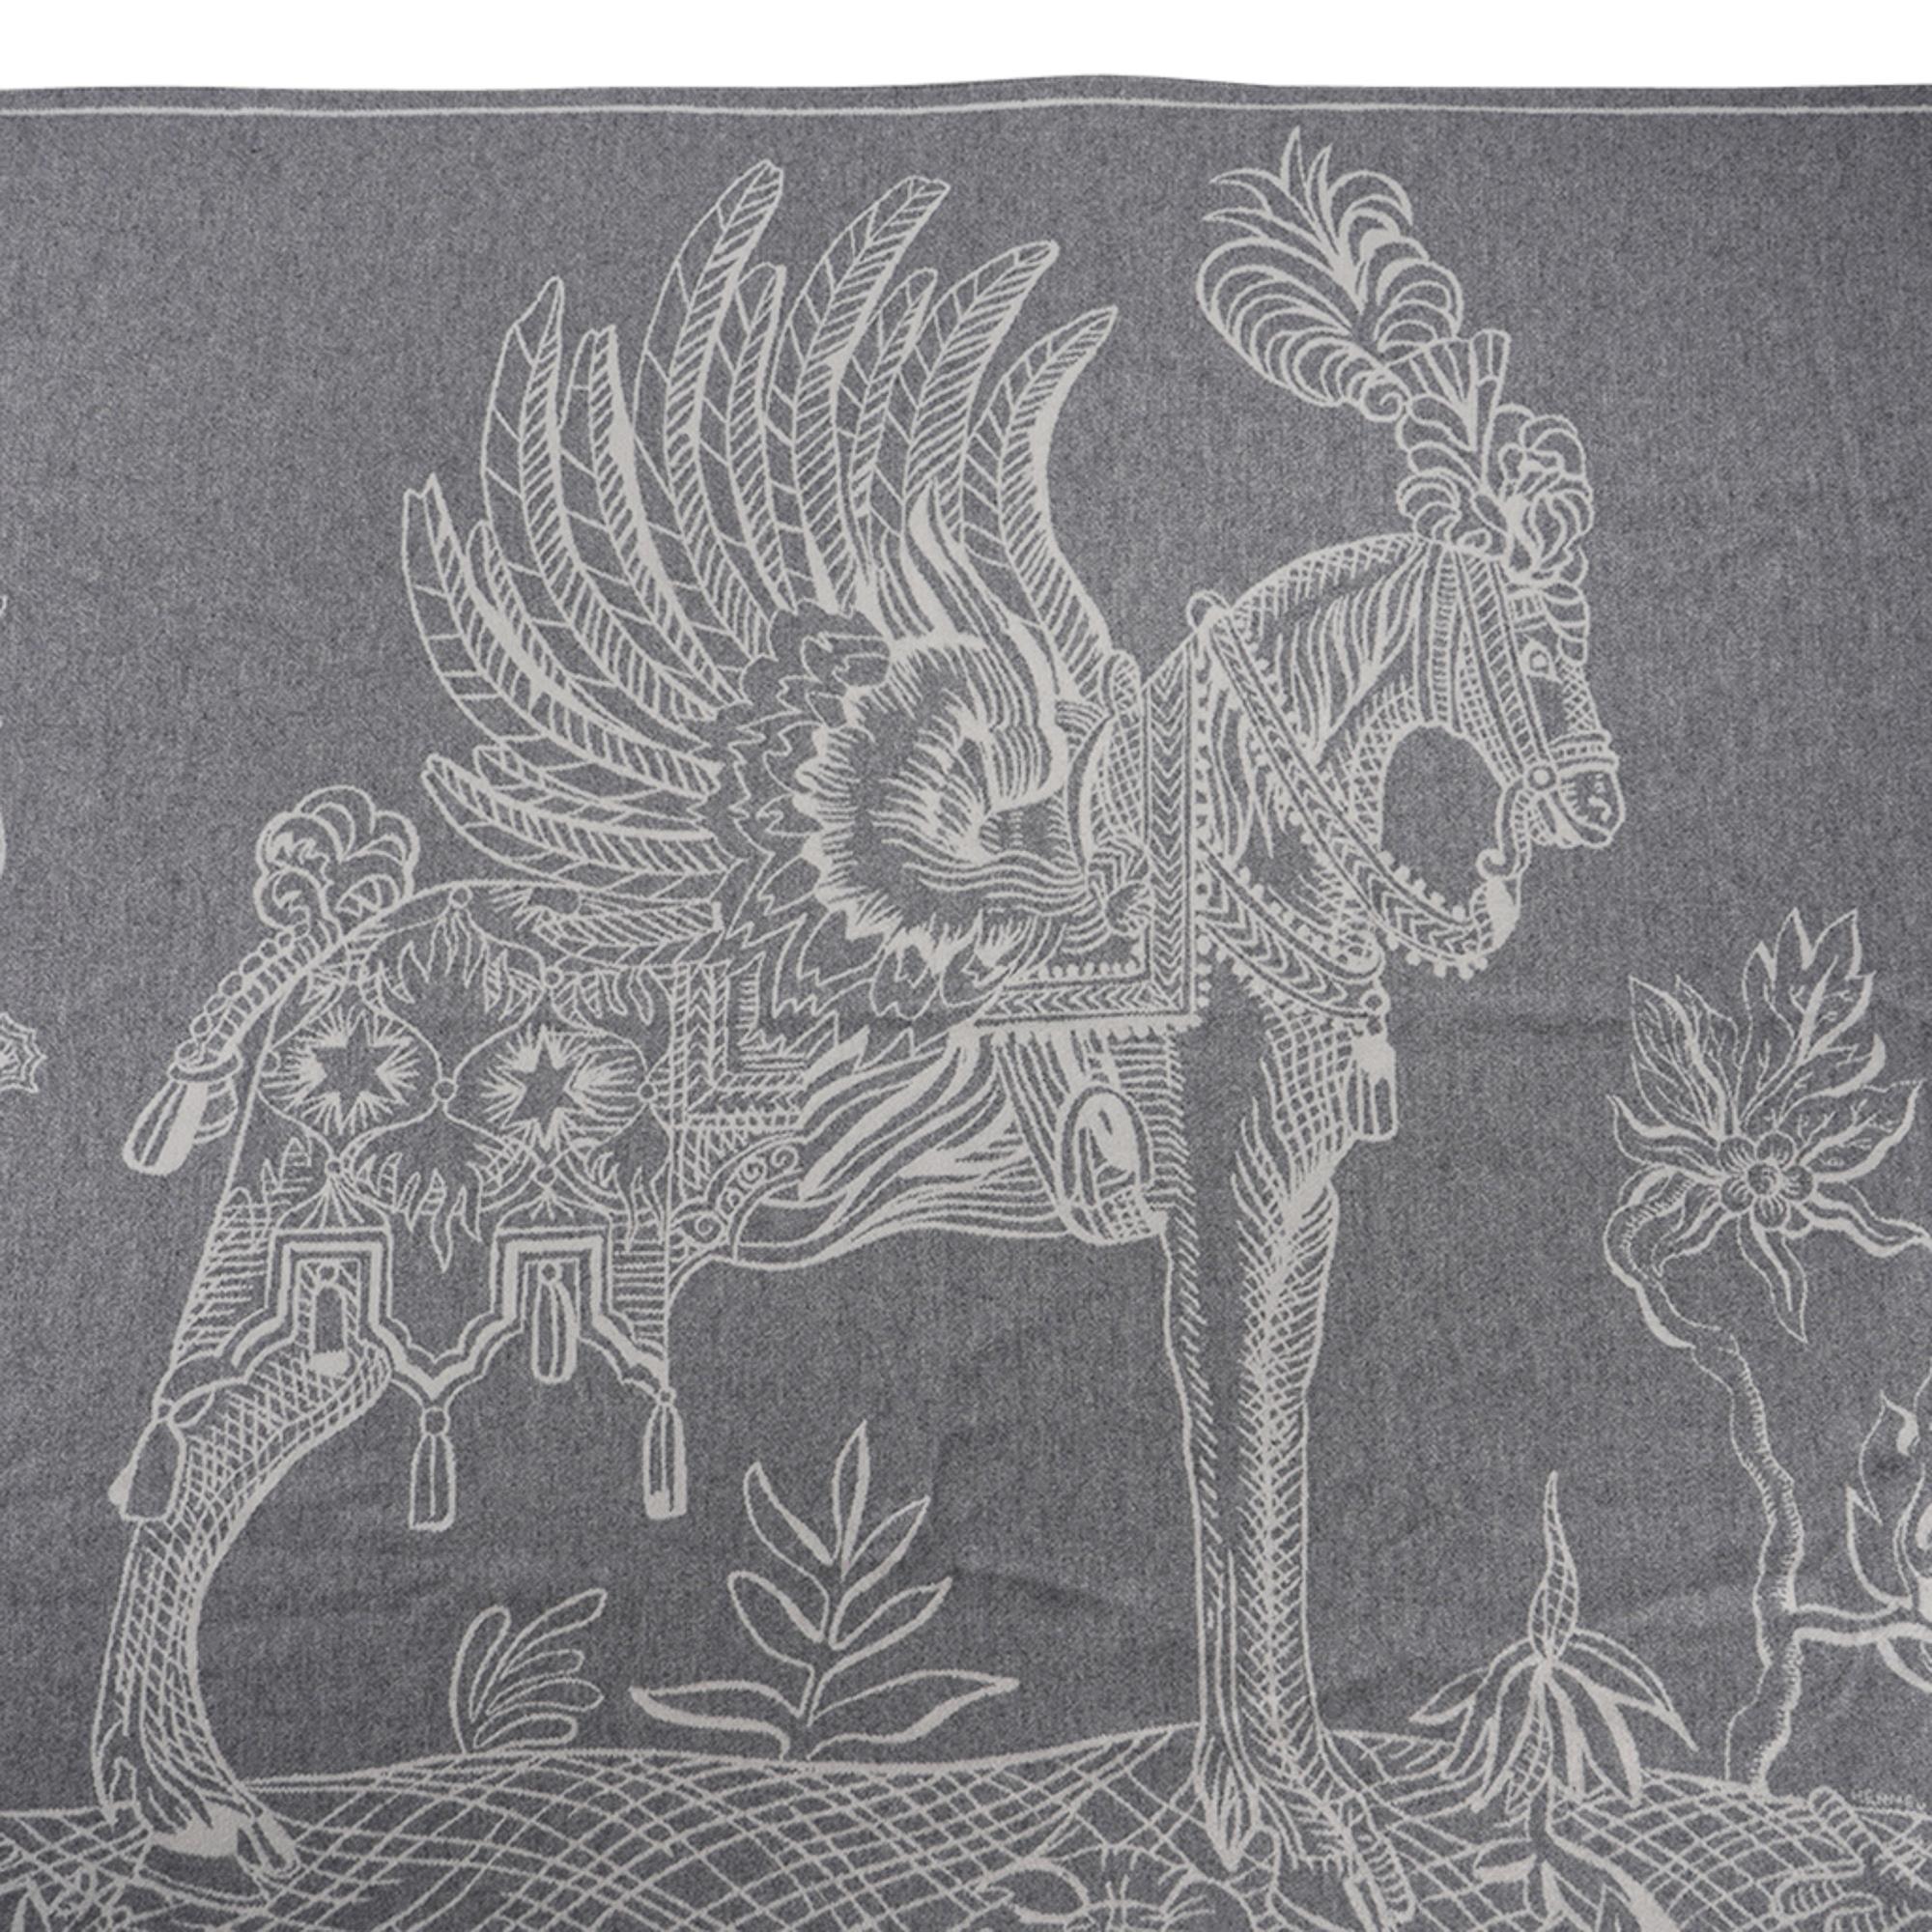 Mightychic offers a guaranteed authentic Hermes Della Cavalleria Favolosa blanket featured in Gris and Ecru.
Jacquard woven 72% cashmere and 28% wool is edged with fringe.
This extraordinary equestrian composition is spectacular.
Designed by